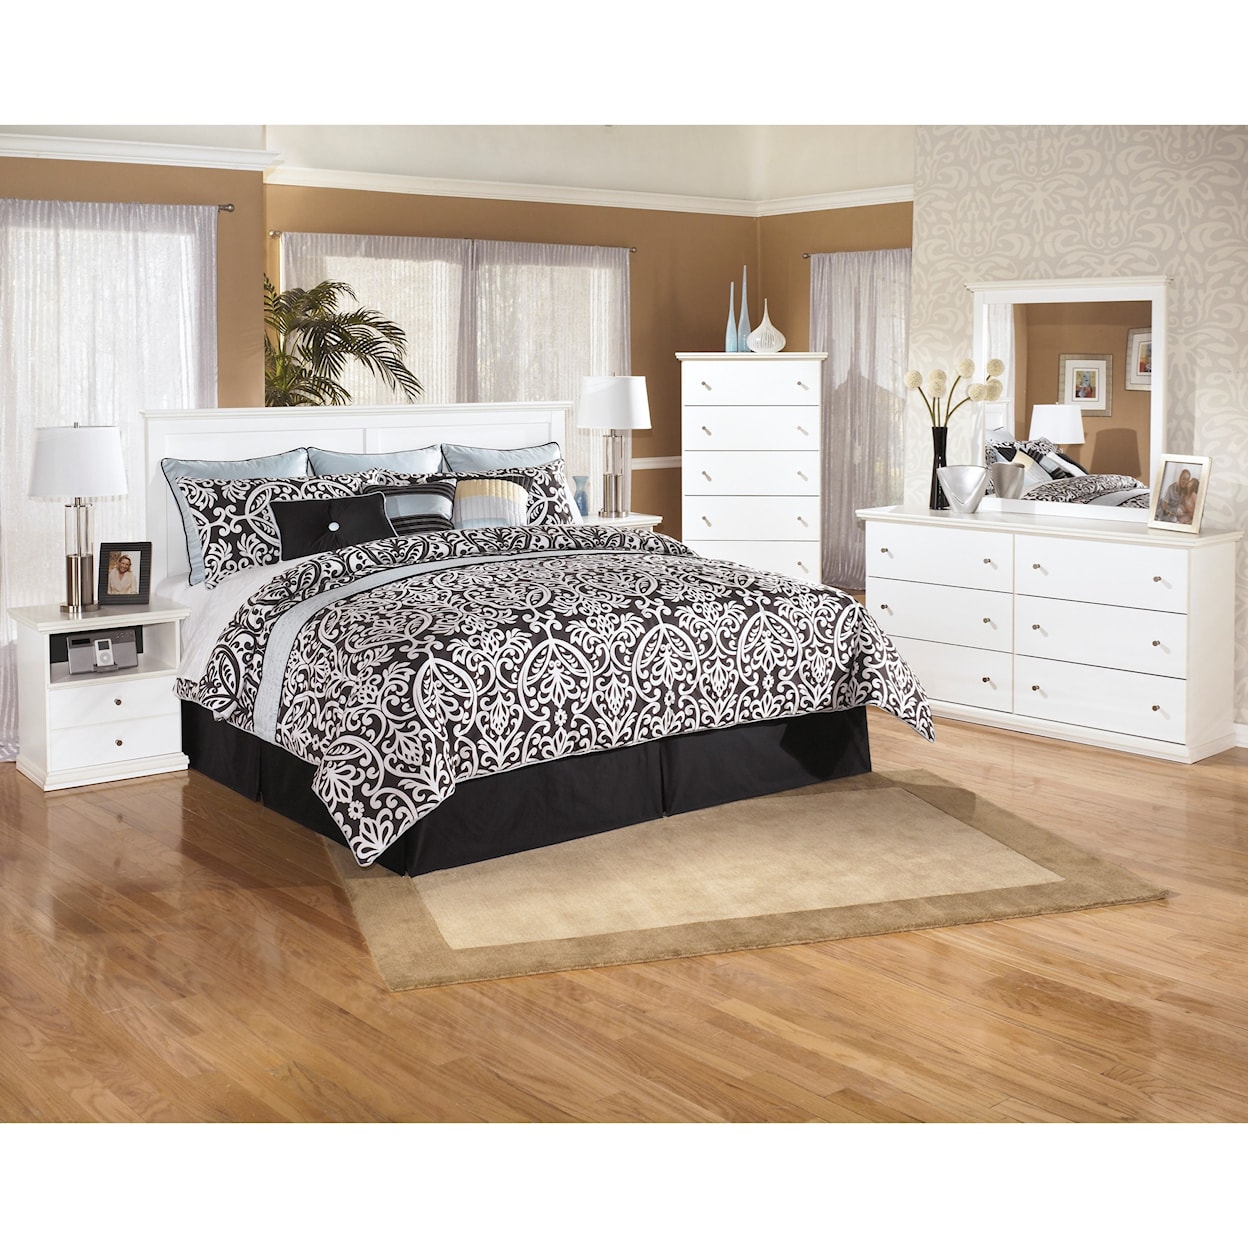 Signature Design by Ashley Bostwick Shoals King Bedroom Group